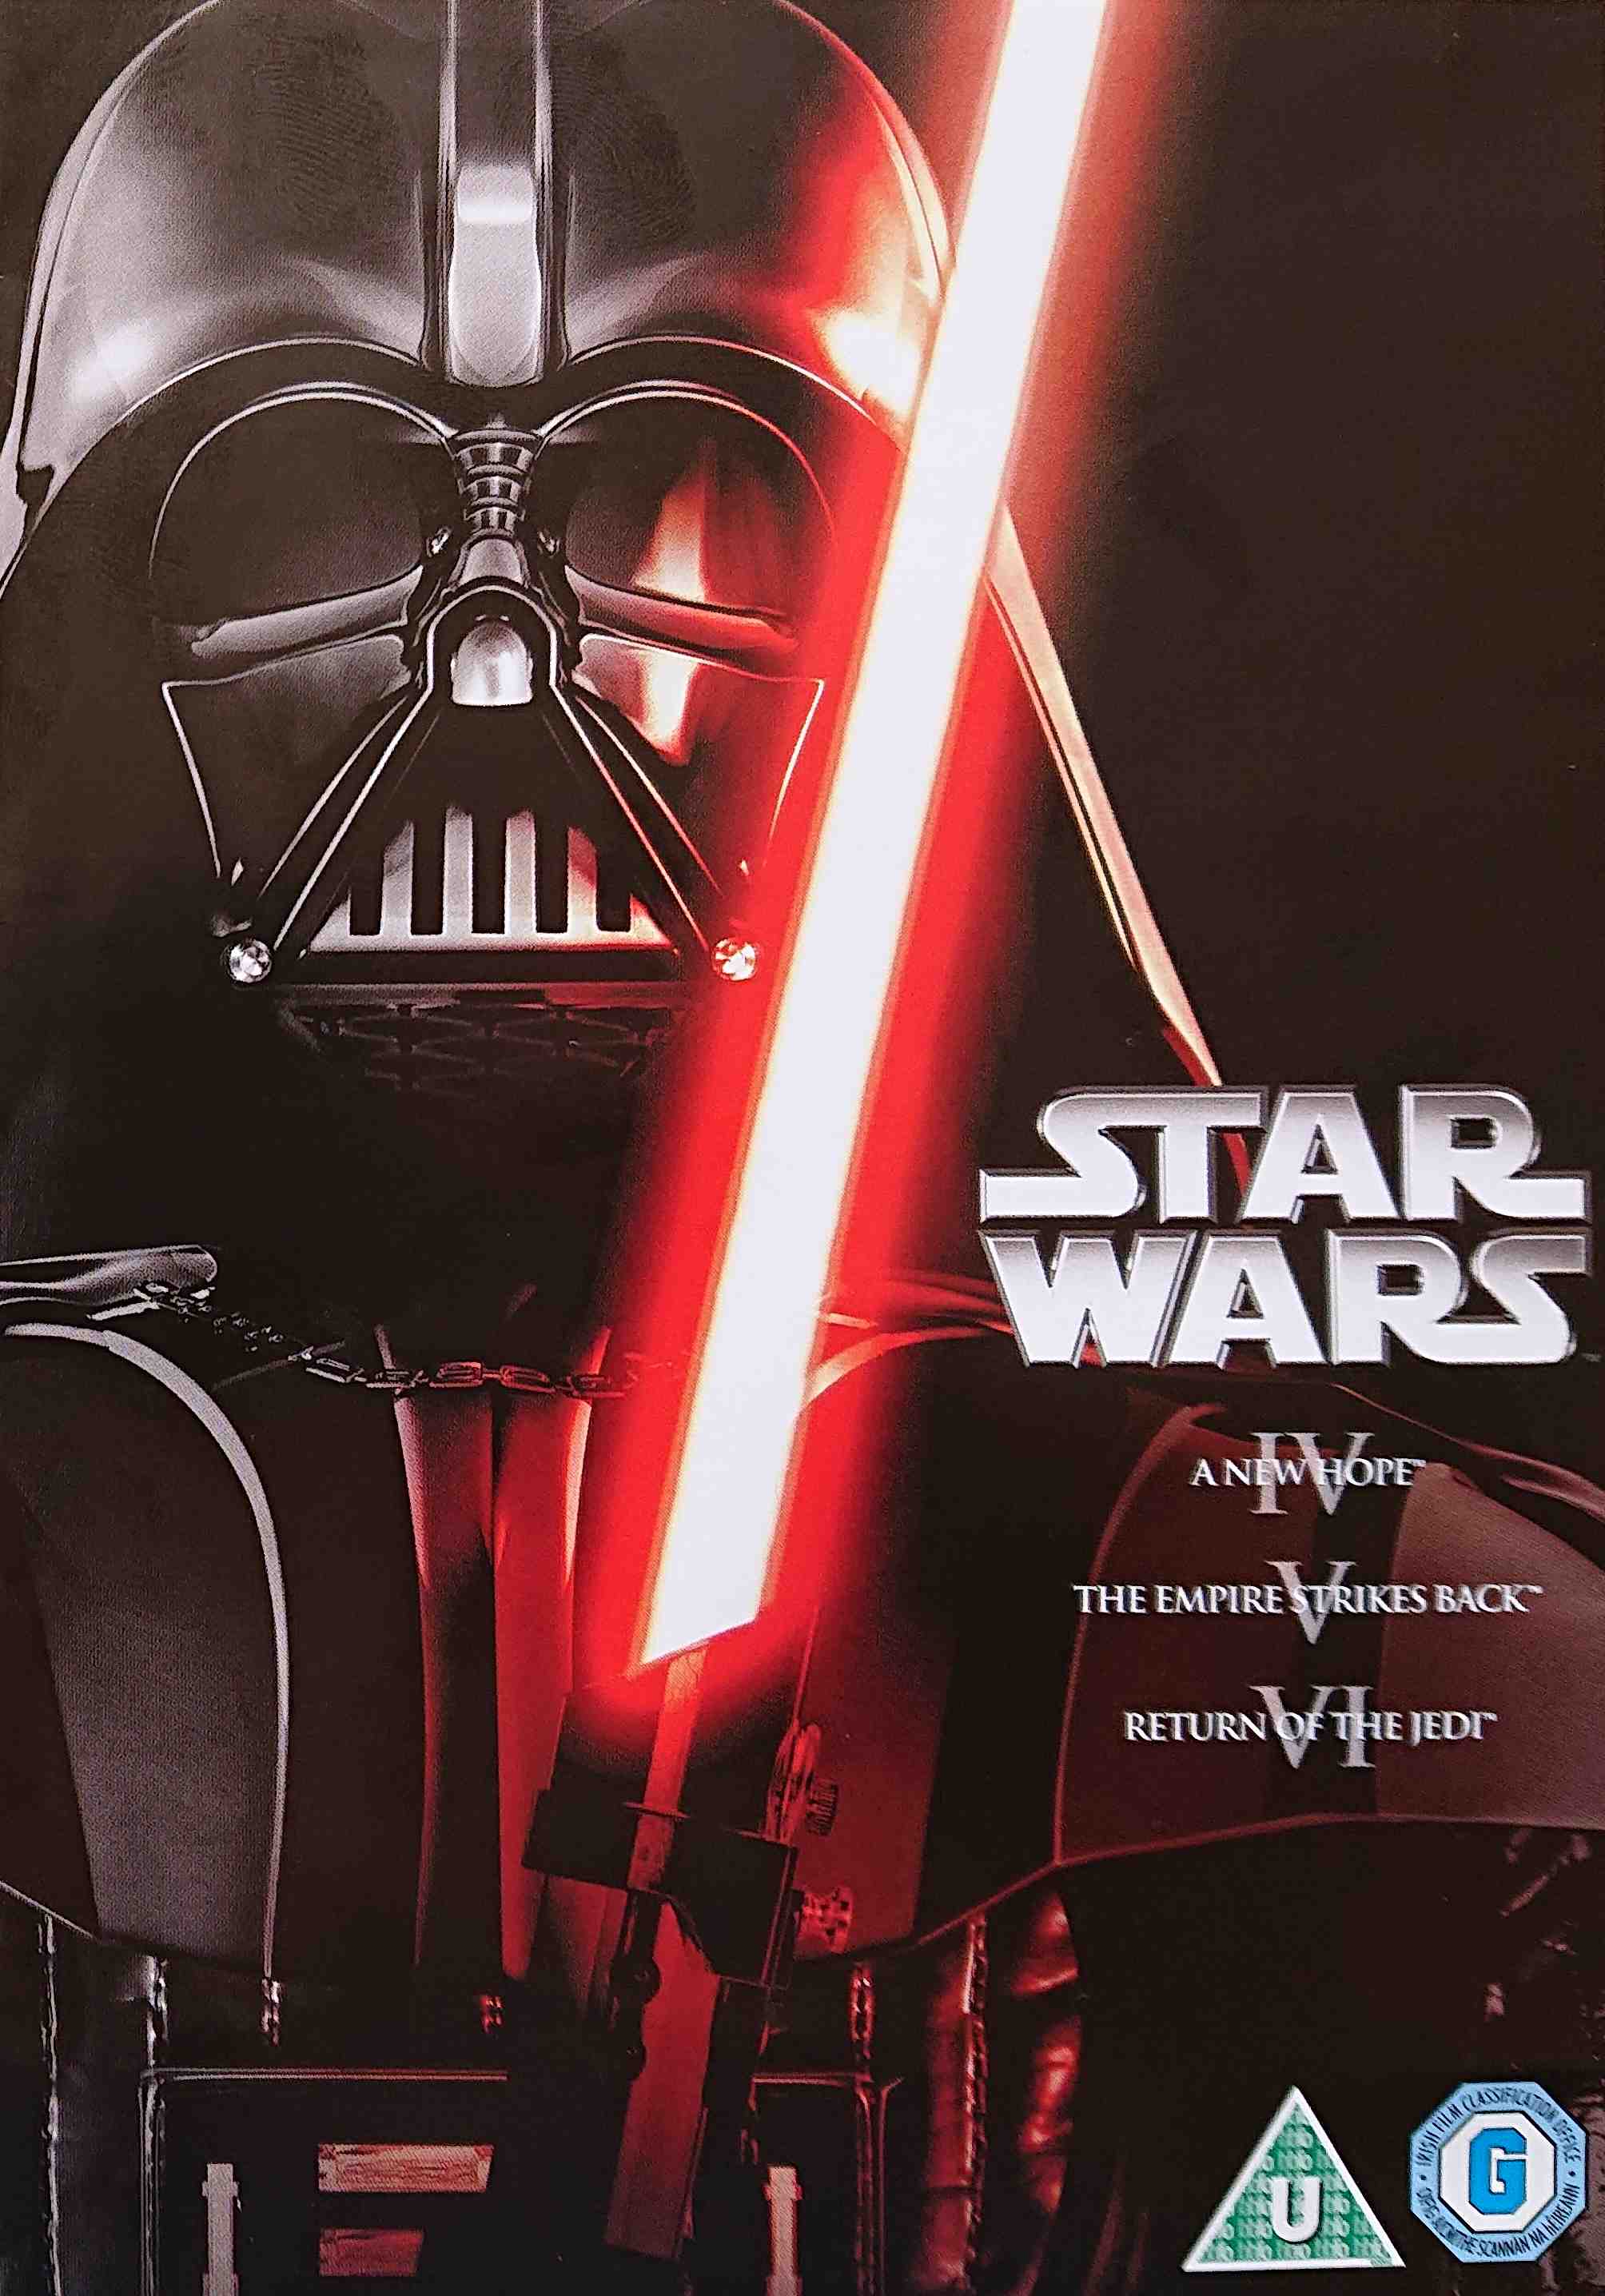 Picture of Star Wars - Episodes IV V and VI by artist George Lucas from ITV, Channel 4 and Channel 5 dvds library